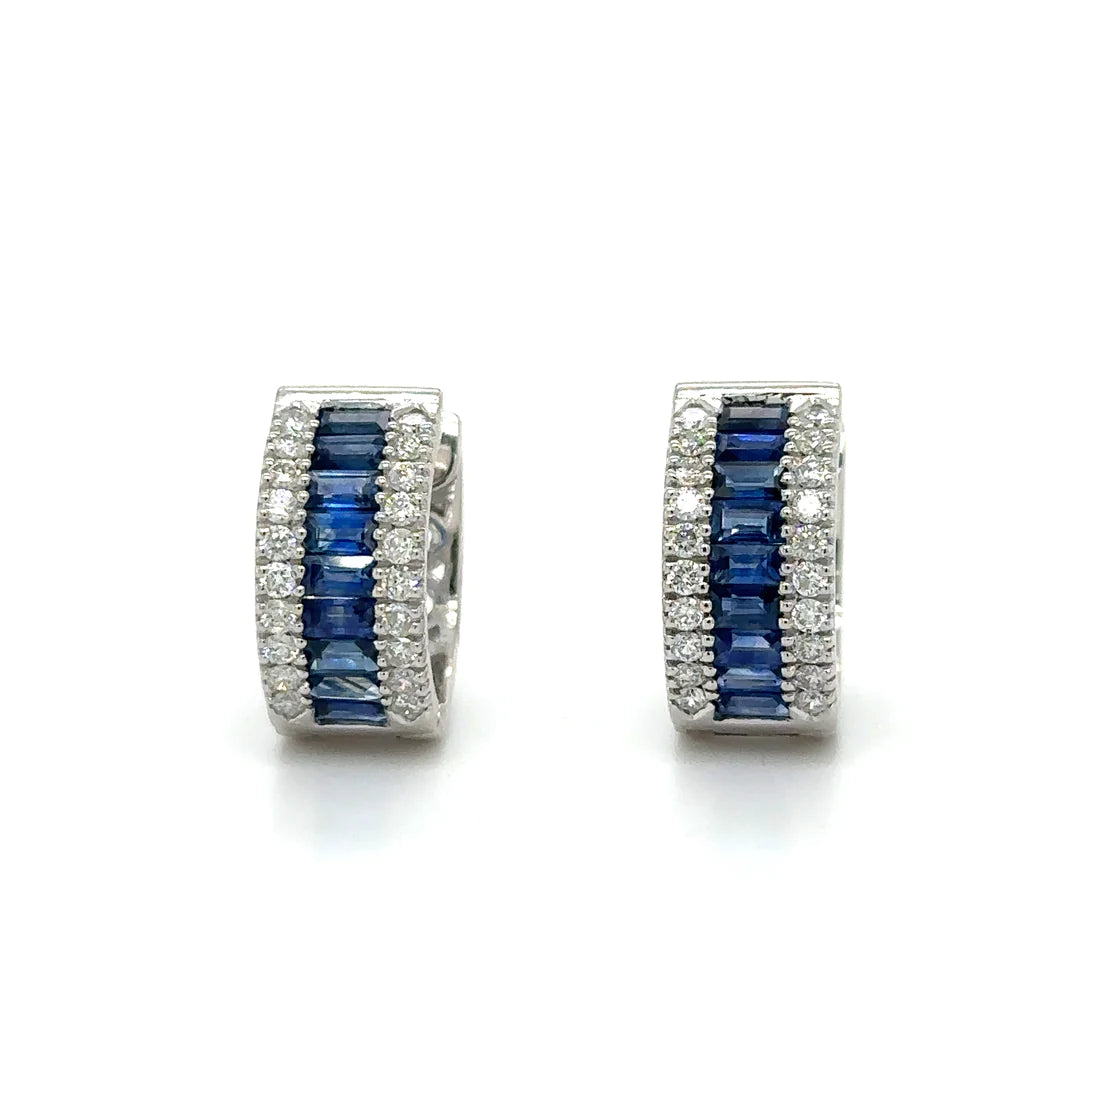 14k White Gold Sapphire and Diamonds Earring